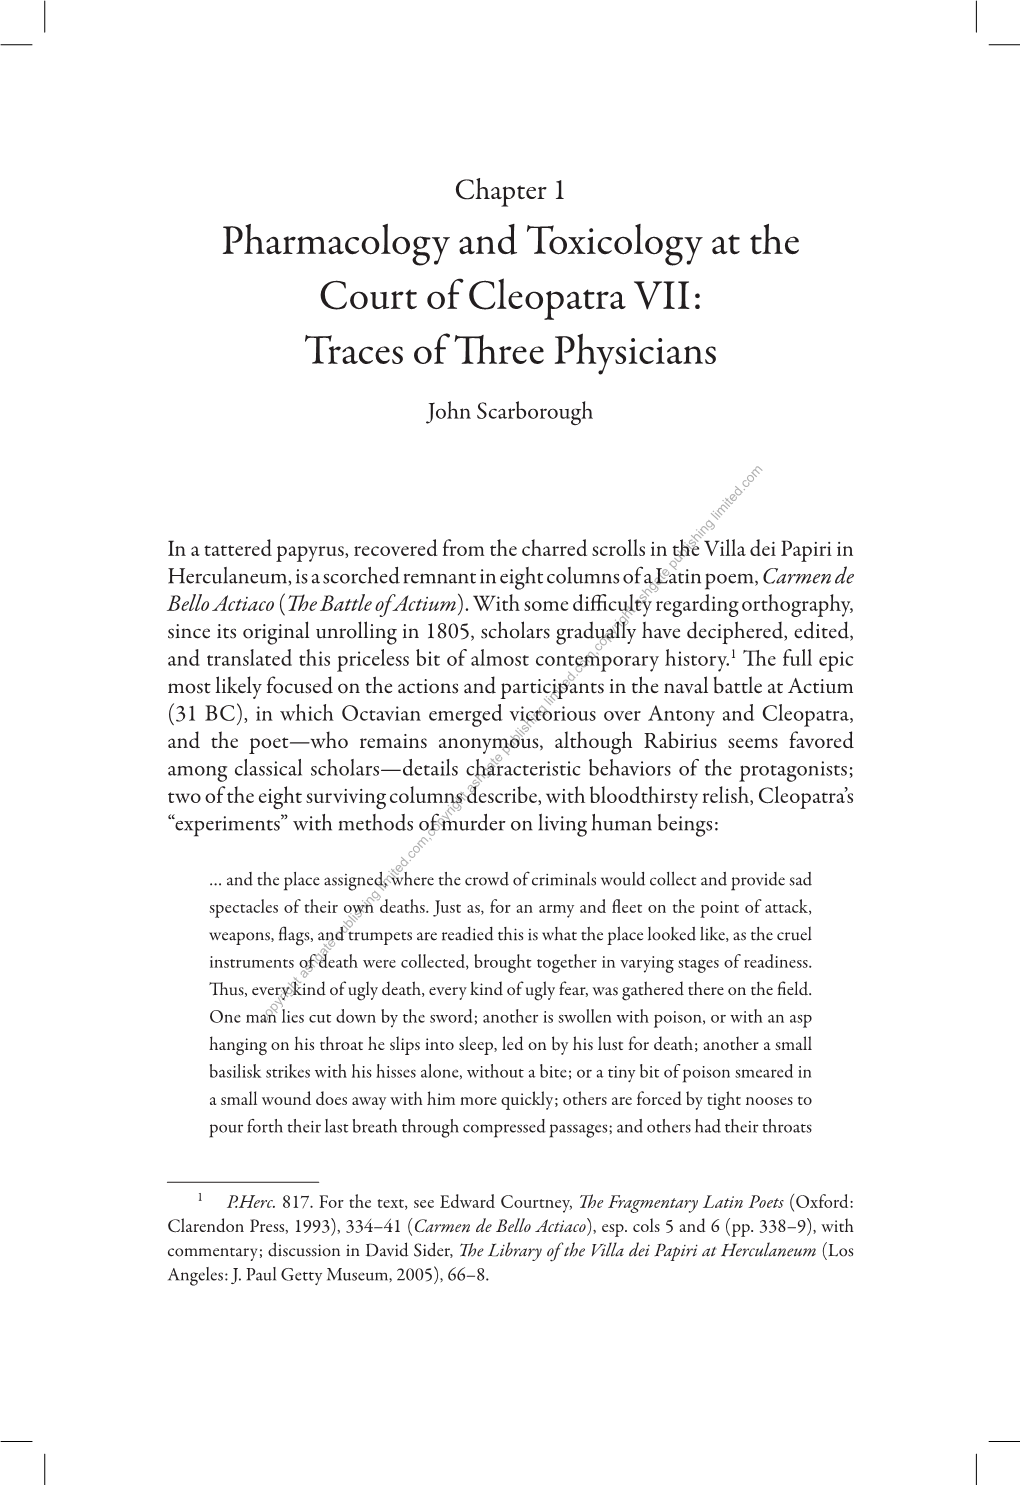 Pharmacology and Toxicology at the Court of Cleopatra VII: Traces of Three Physicians